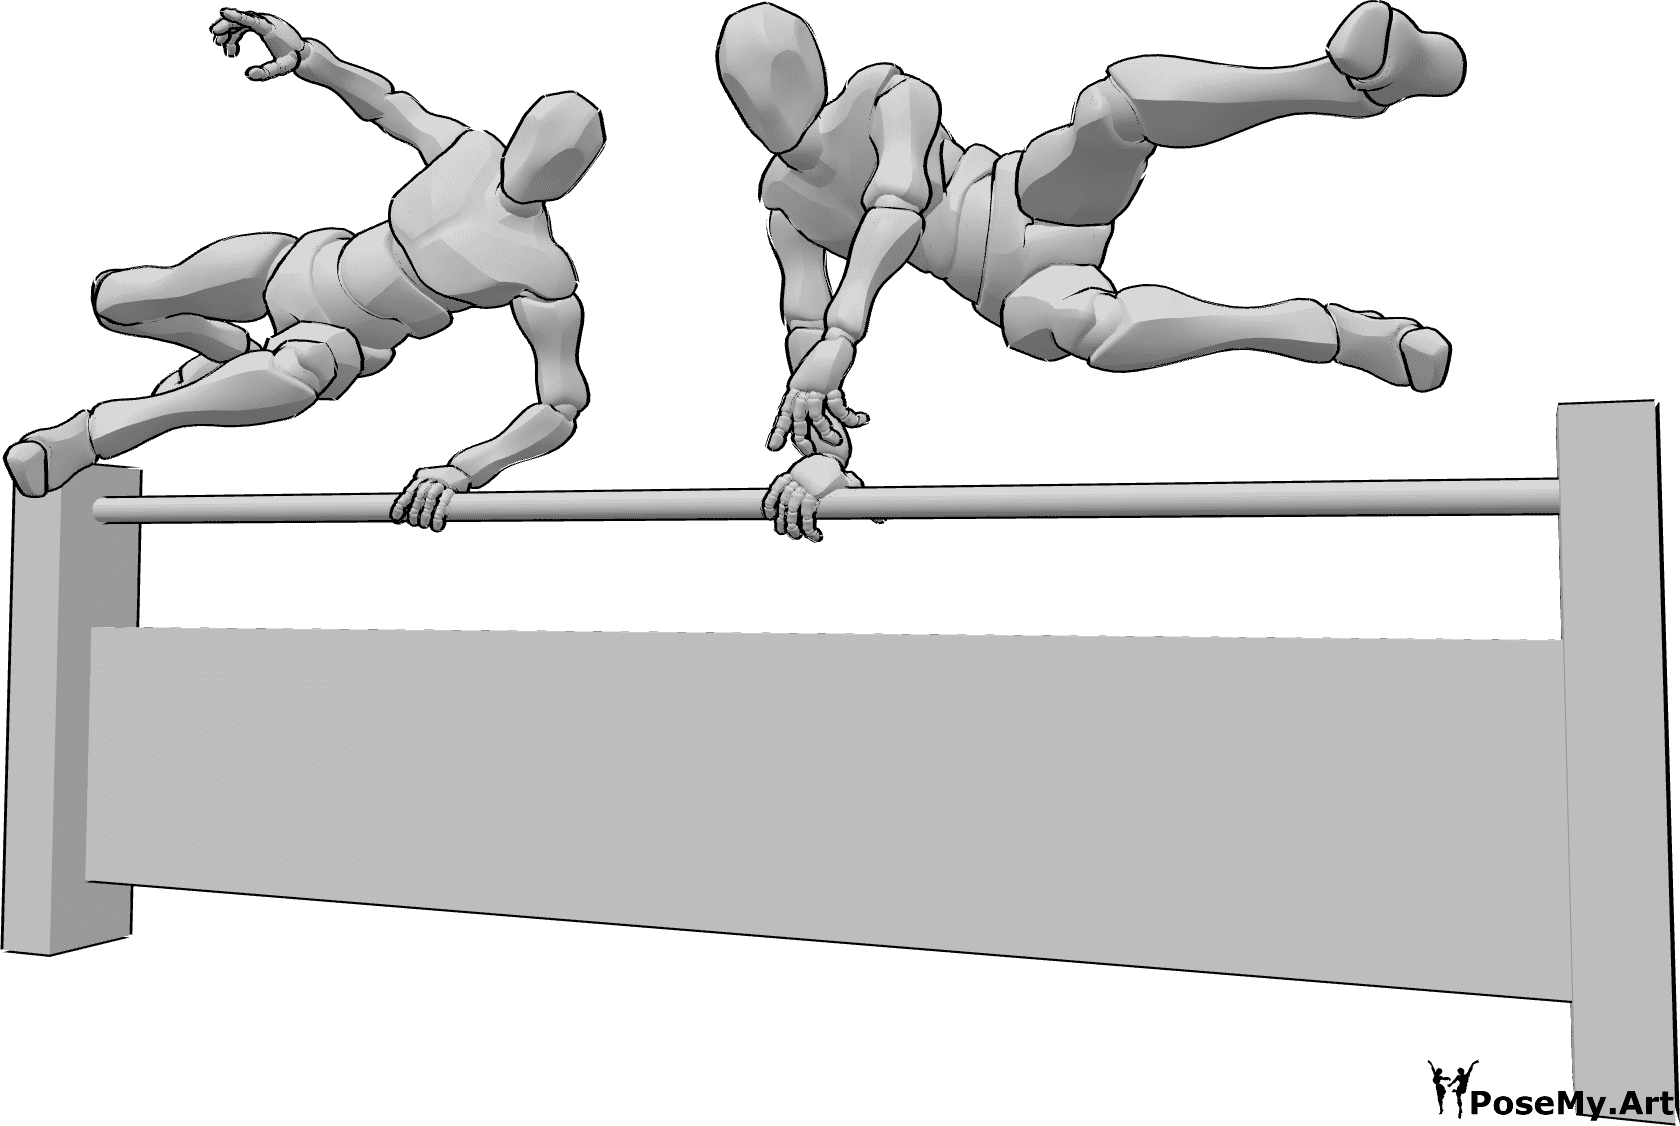 Pose Reference- Jumping over barrier pose - Two males are jumping over a barrier, parkour jumping pose